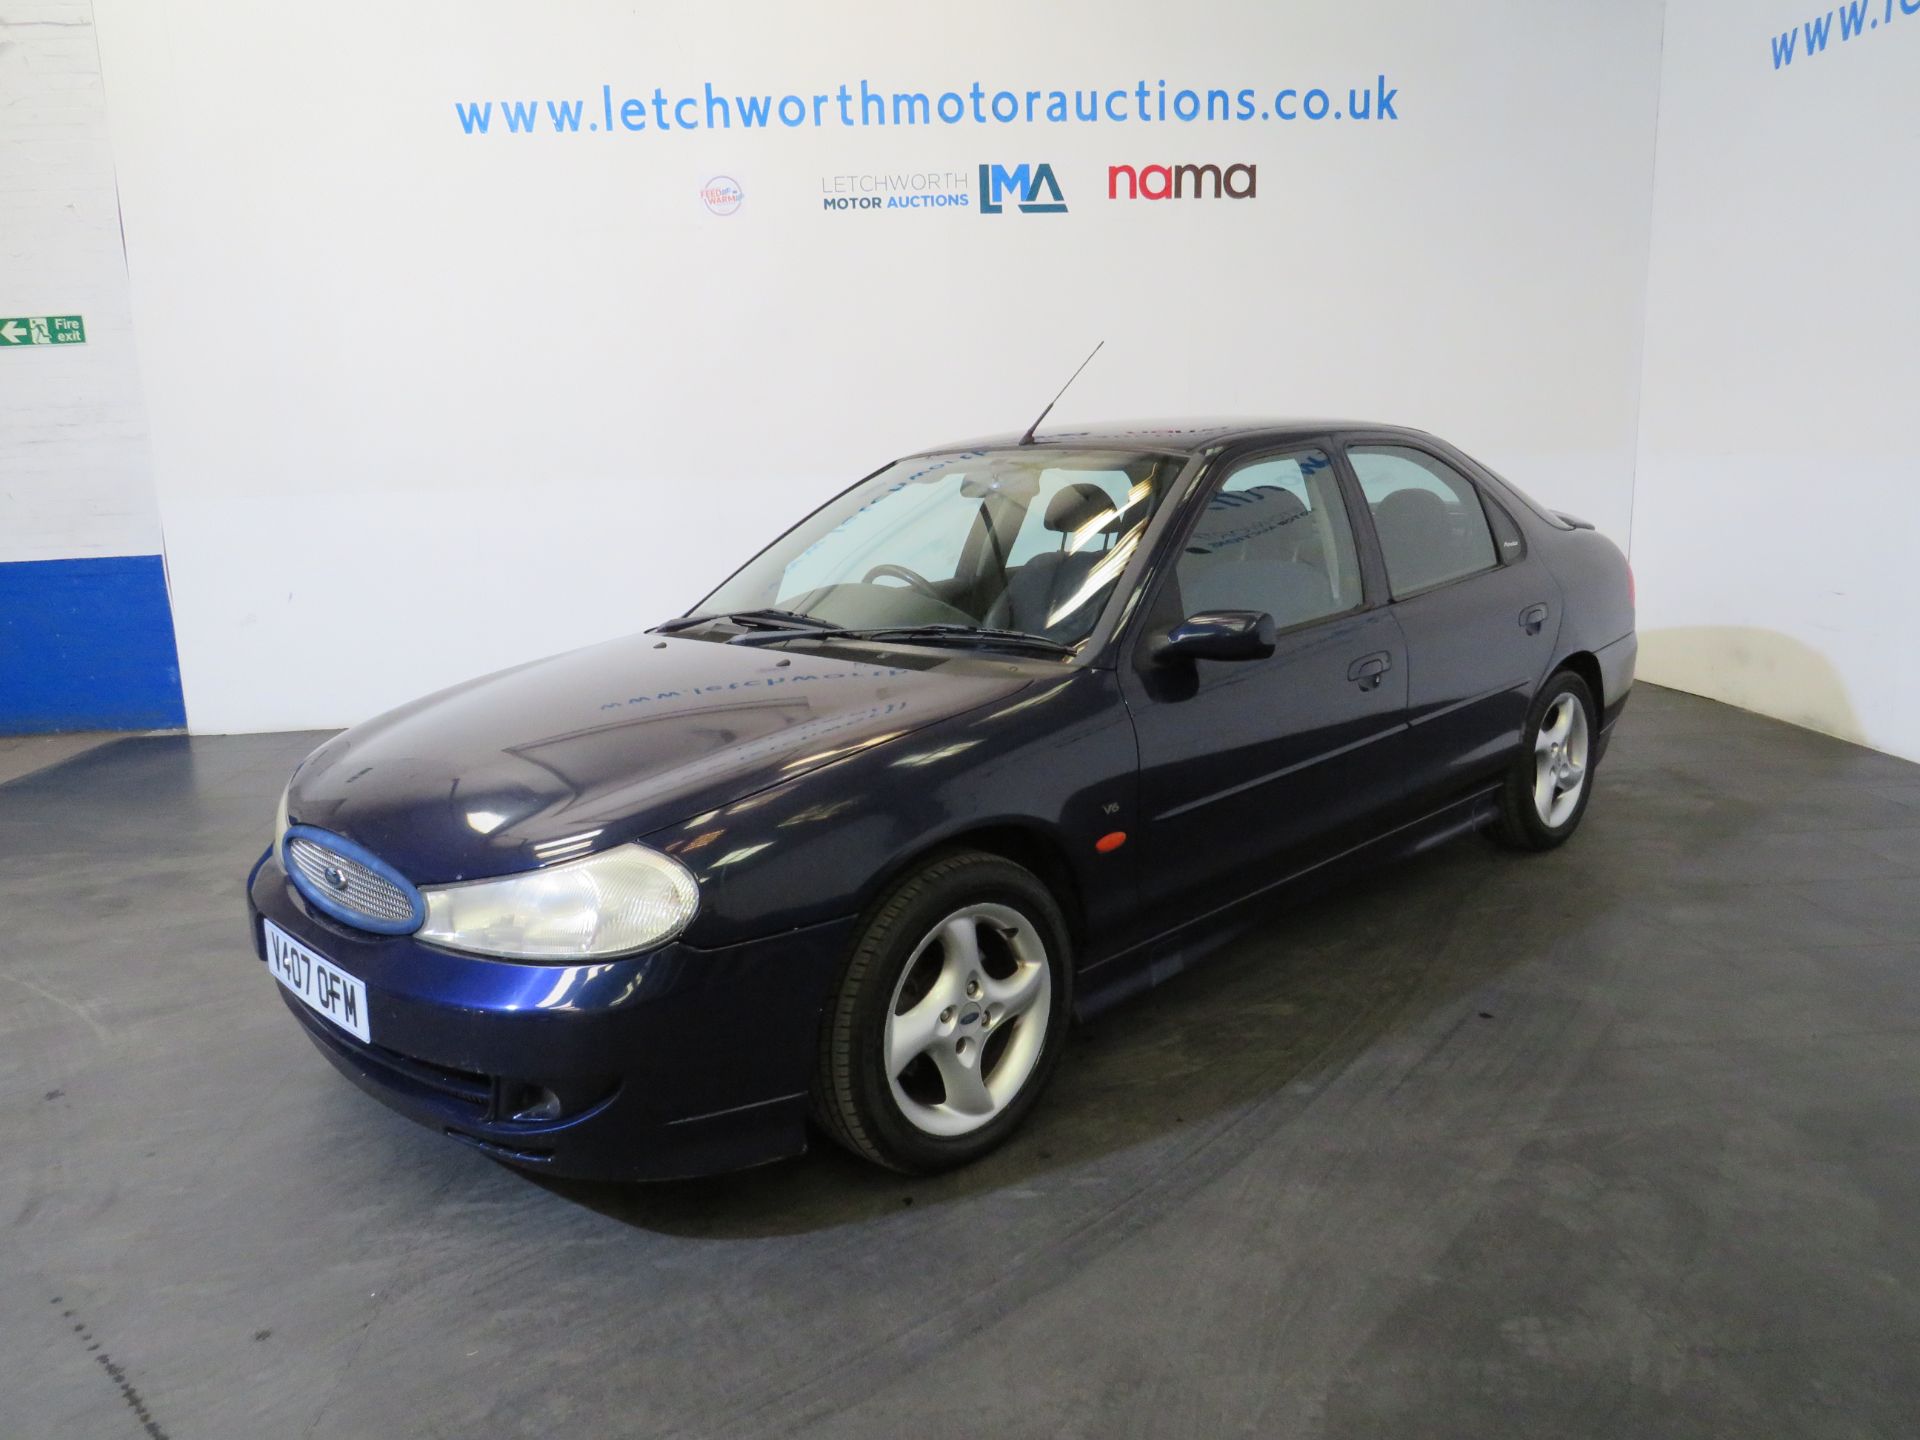 1999 Ford Mondeo ST24 V6 - 2544cc - Image 3 of 14